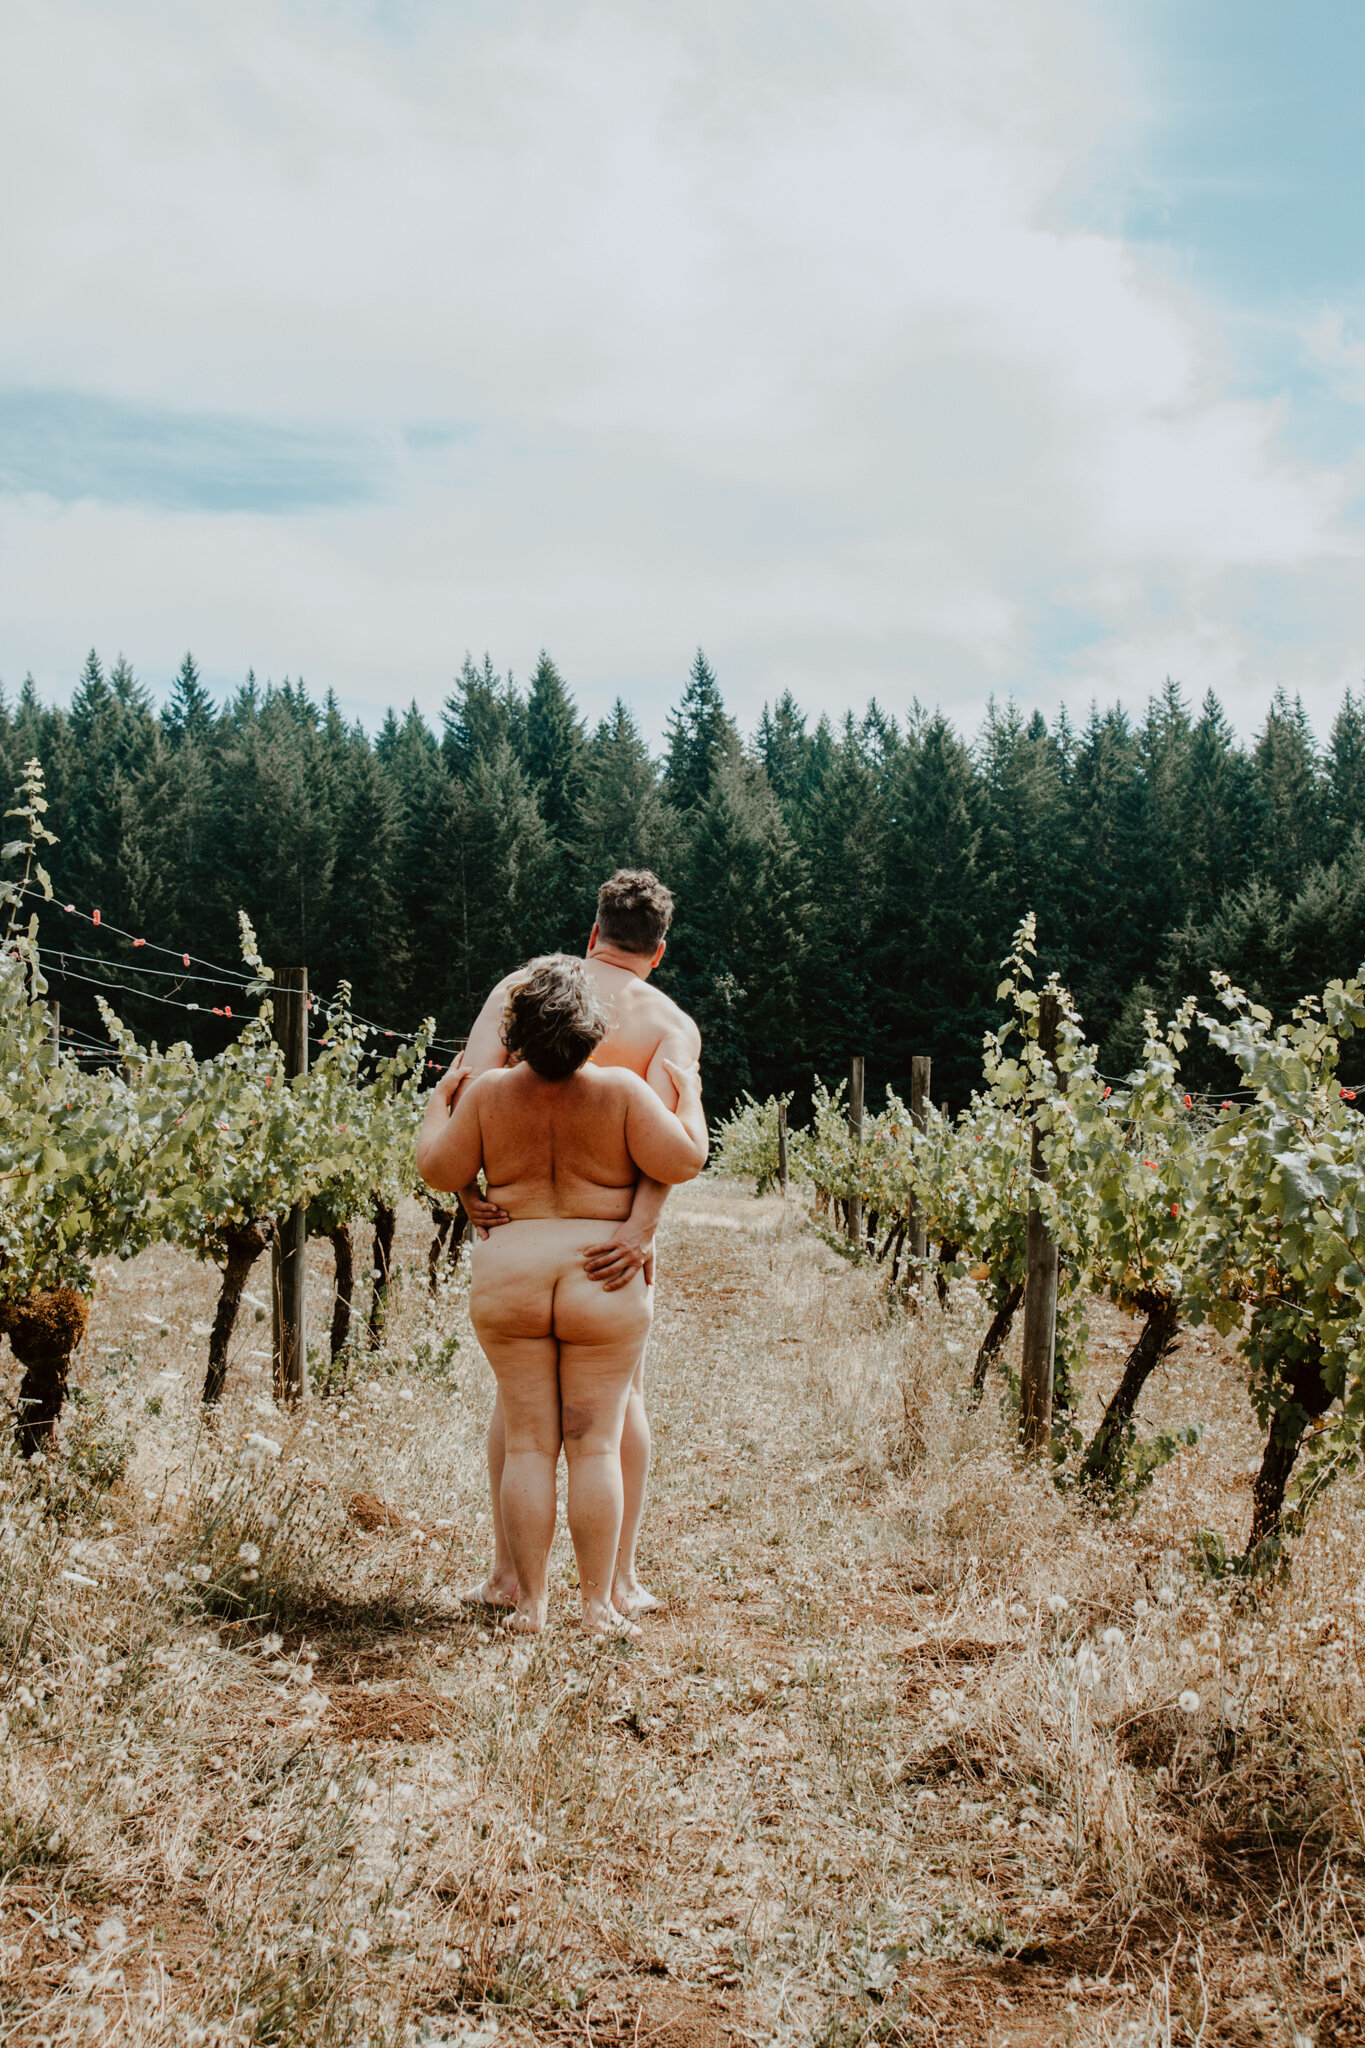 Naked couple in vineyard